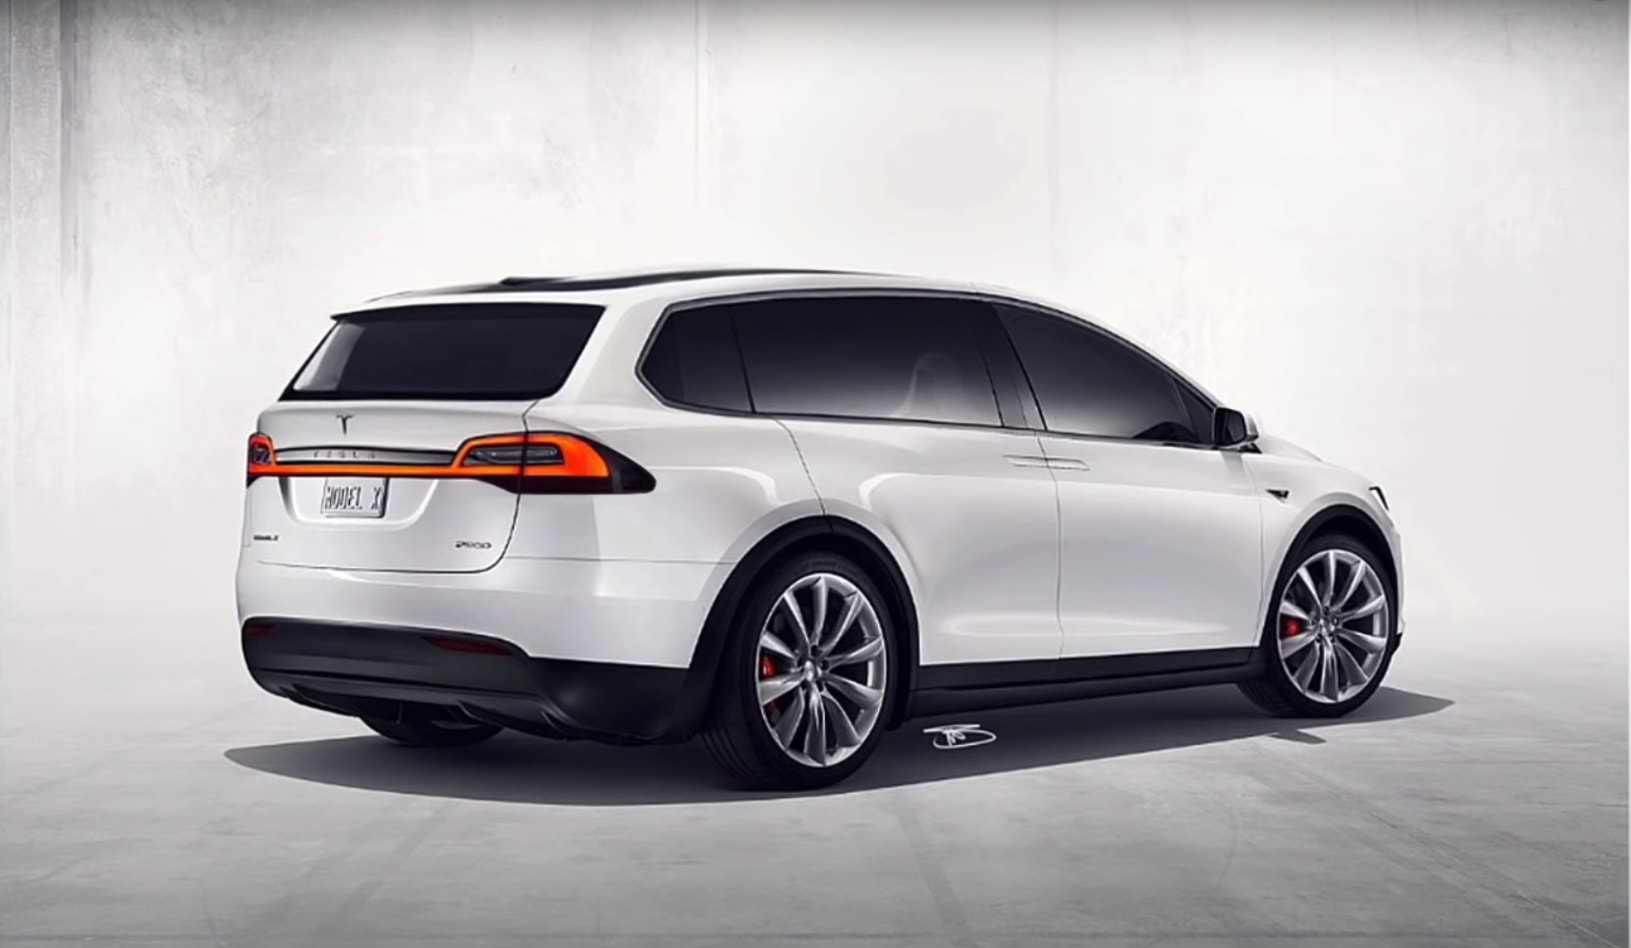 Complex pot Terugspoelen Would You Buy a Tesla Model X with Classic SUV Lines? Here's a Quick Peek -  autoevolution